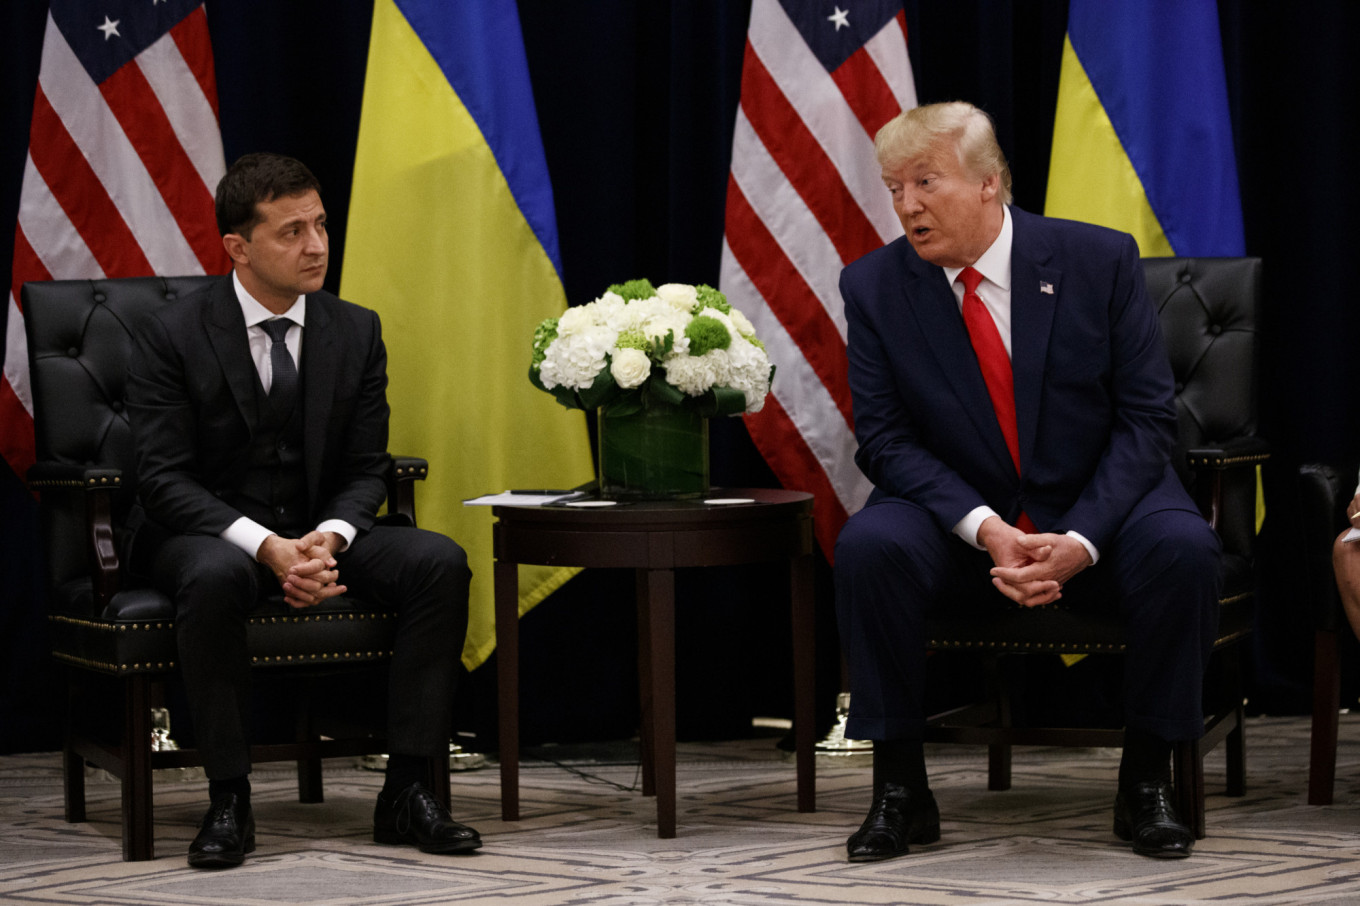 Seeking Favors, Trump Asked Ukraine President to Investigate Biden - The Moscow Times1360 x 906